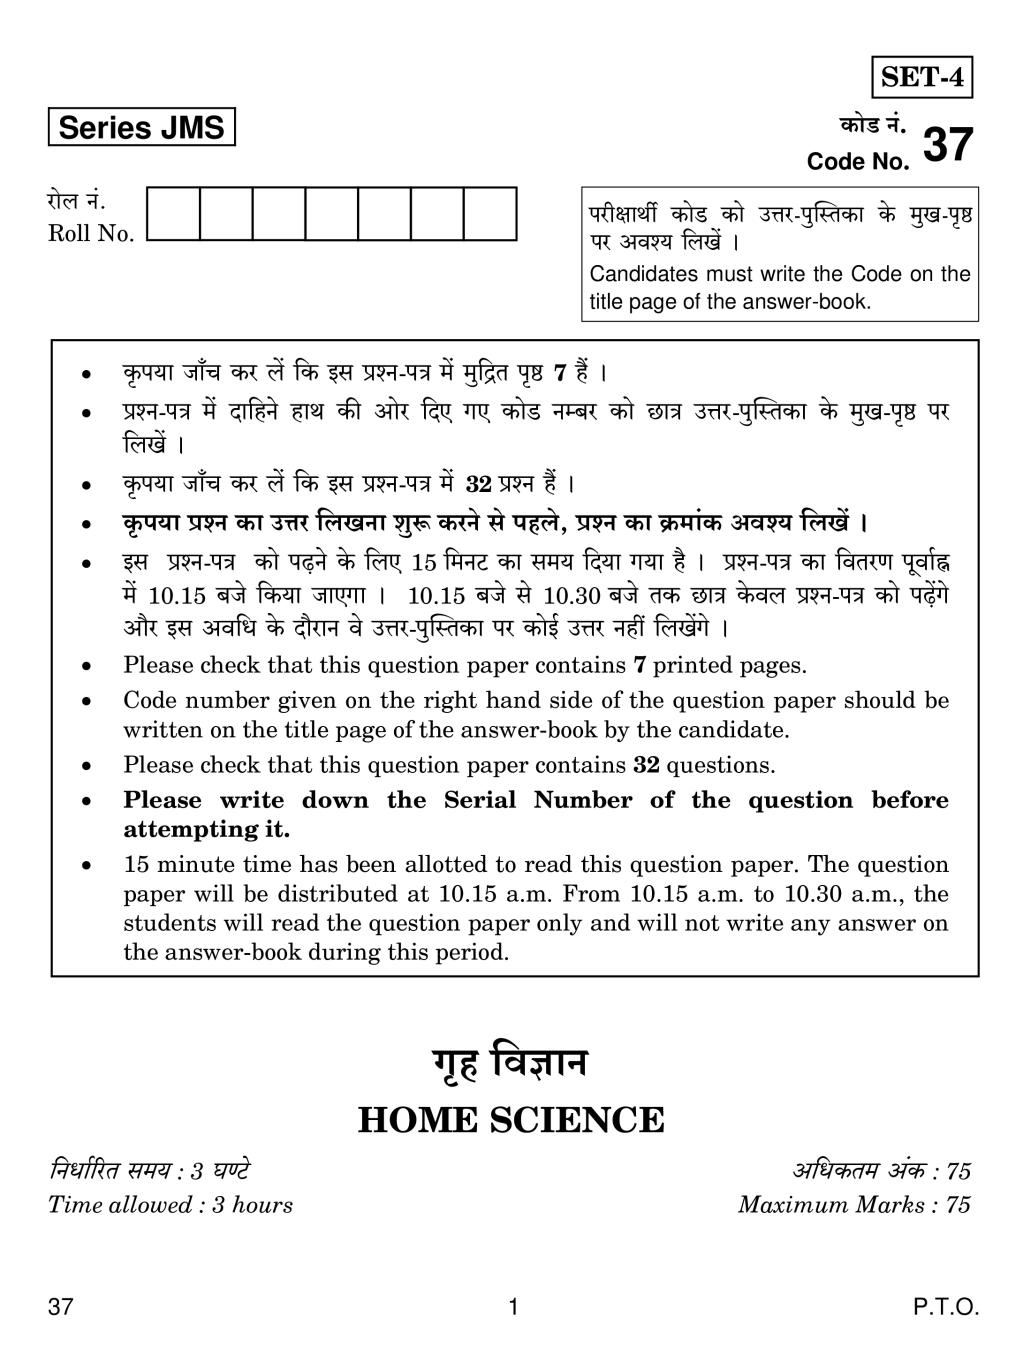 CBSE Class 10 Home Science Question Paper 2019 - Page 1